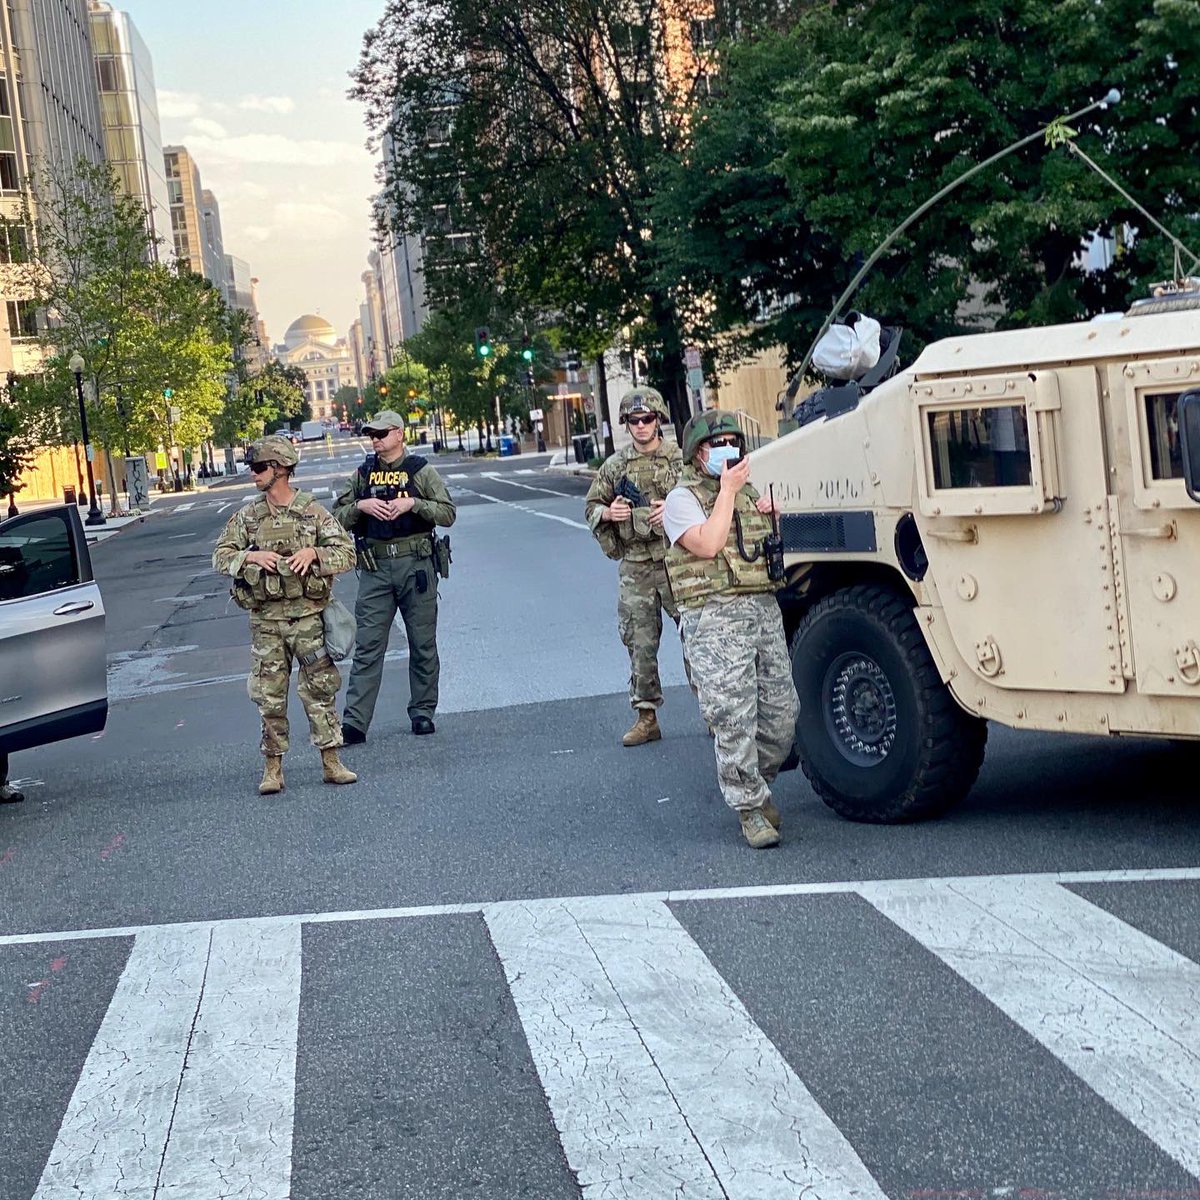  #WashingtonDC was swarmed with law enforcement and military personnel with entire city blocks cordoned off. Loud military helicopters circled the city. Federal agencies were deployed. https://www.hrw.org/news/2020/06/05/us-stop-using-untrained-abusive-agencies-protests